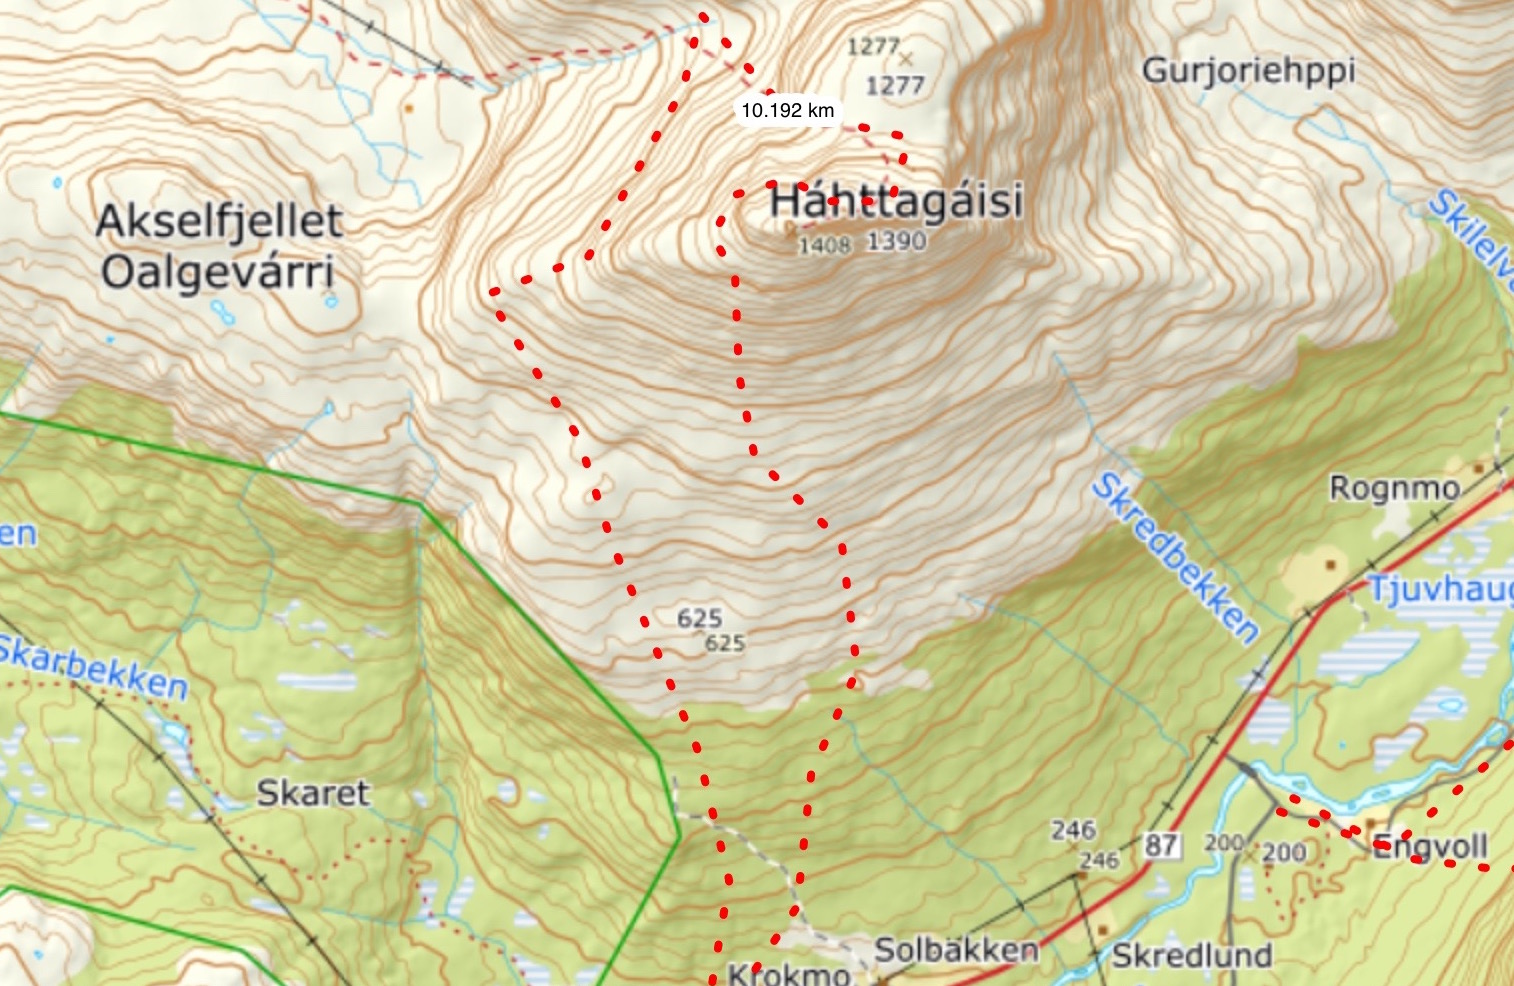 Topographical map of our ascent route of háhttagáisi in the Tamokdalen Backcountry